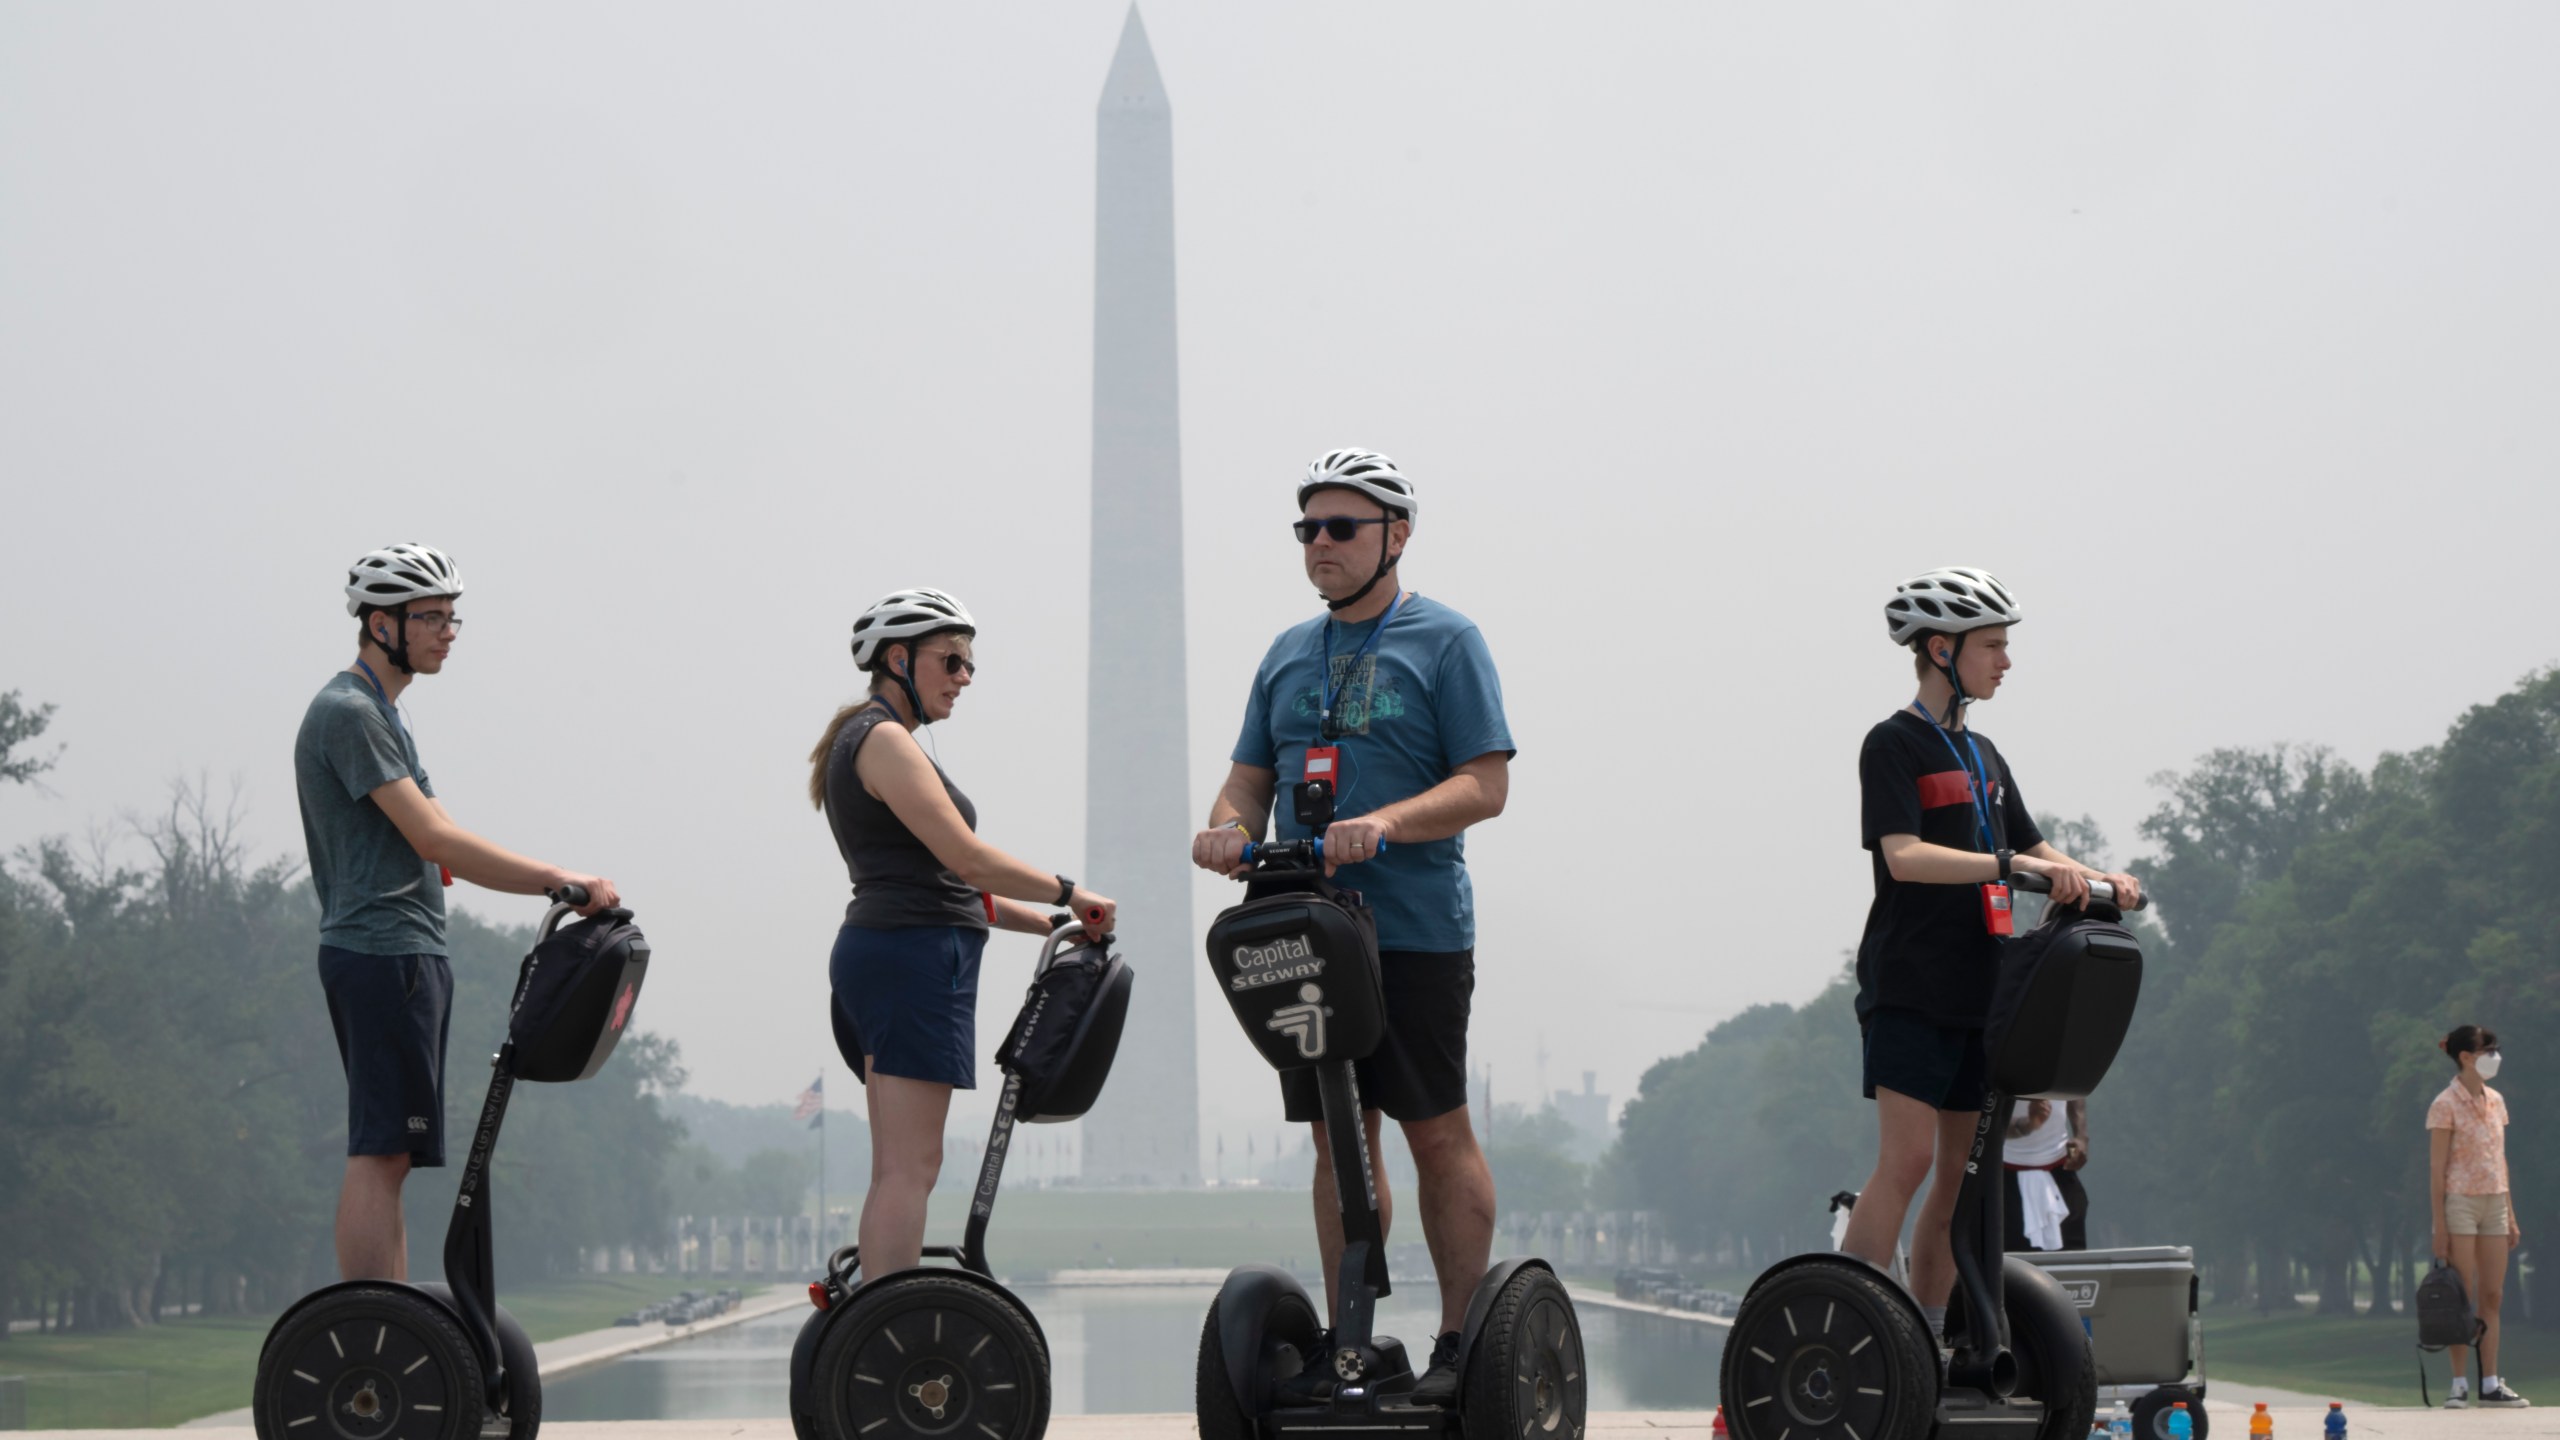 Tourists on Segways visit the Lincoln Memorial while the sky is hazy with smoke from wildfires in Canada, obscuring the view of the Capitol and other buildings along the National Mall almost completely past the Washington Monument, Thursday, June 29, 2023, in Washington. (AP Photo/Jacquelyn Martin)